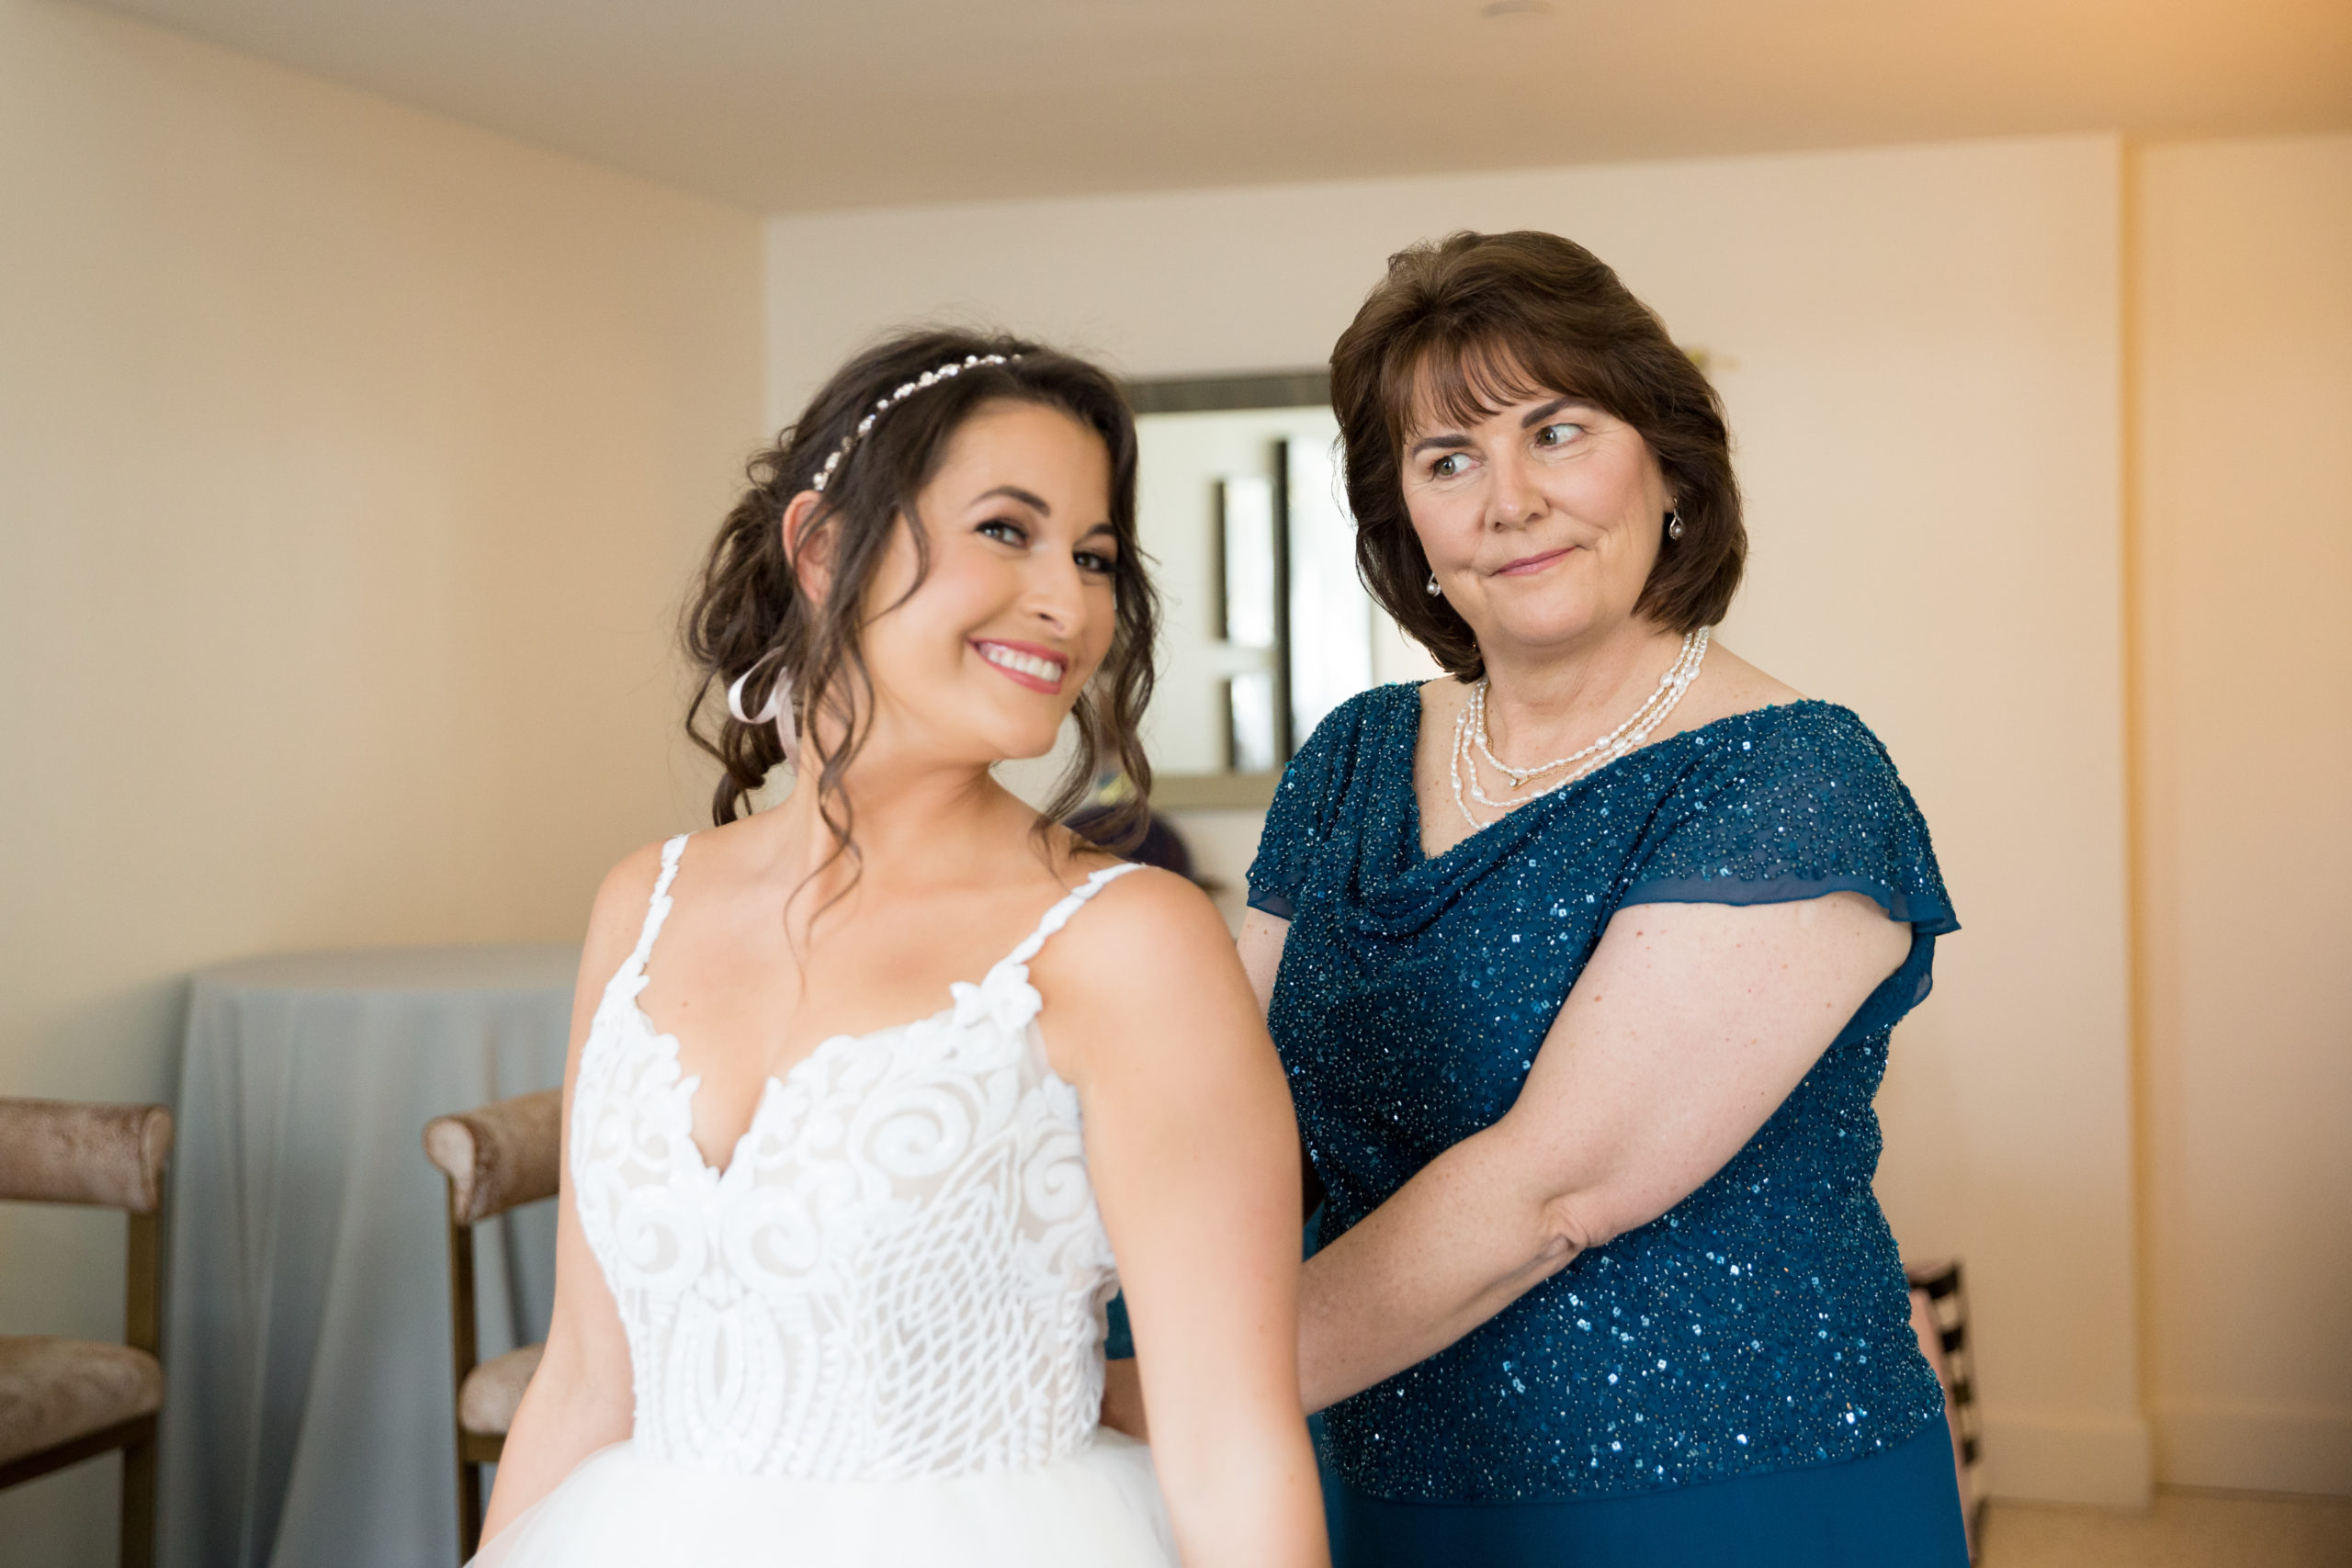 The bride's mom helps her into her wedding dress